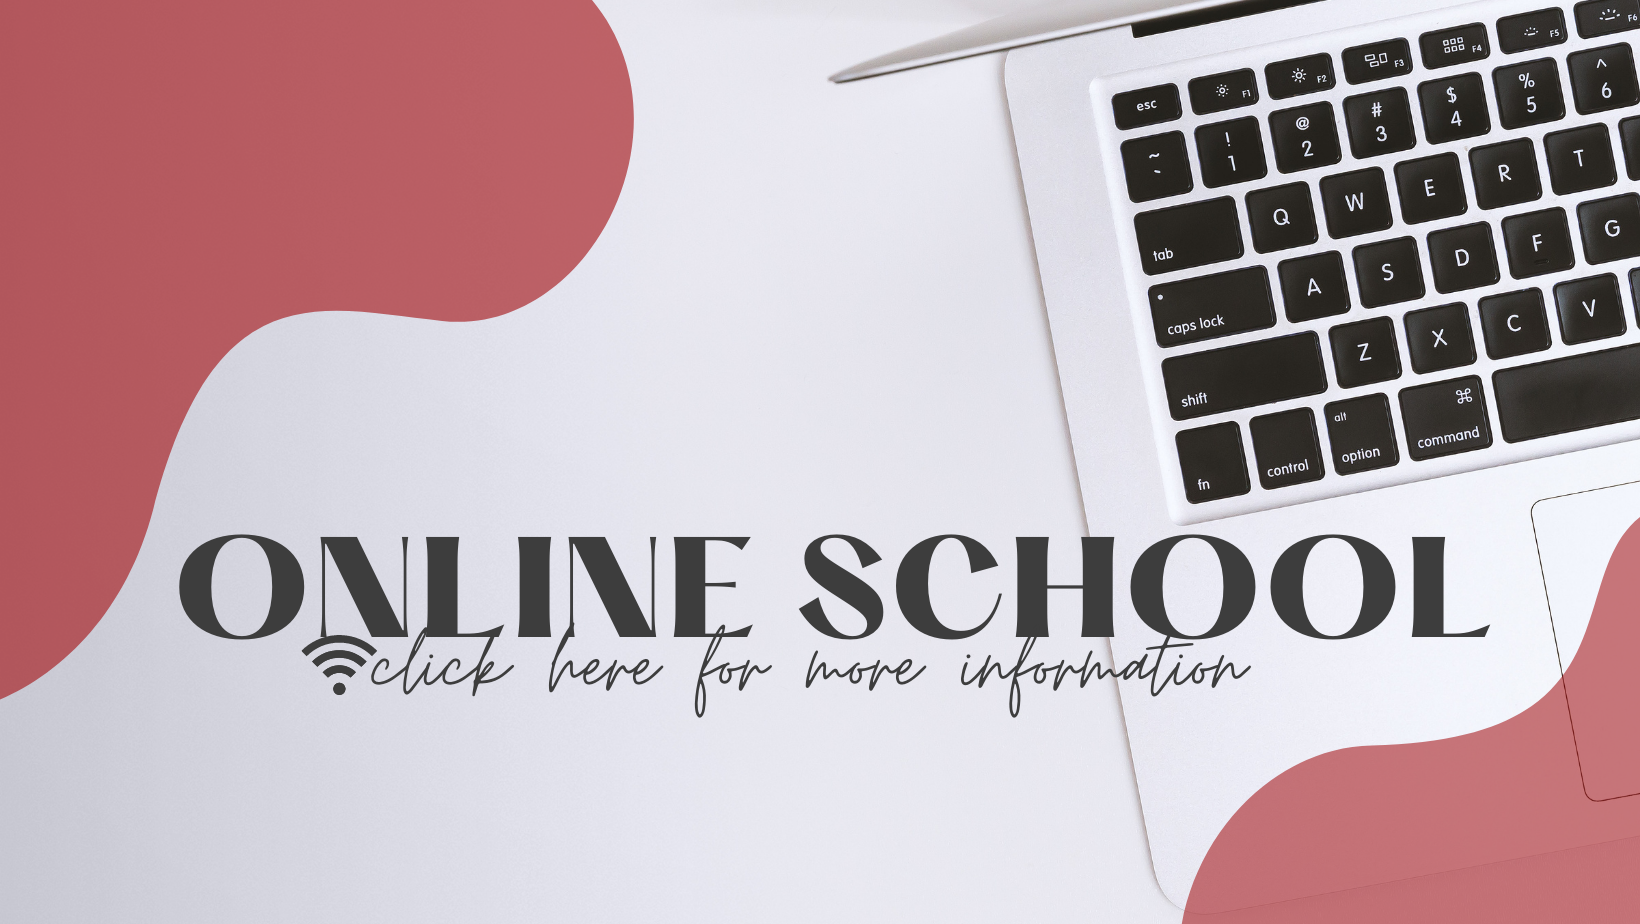 Online School, Find Out More Information